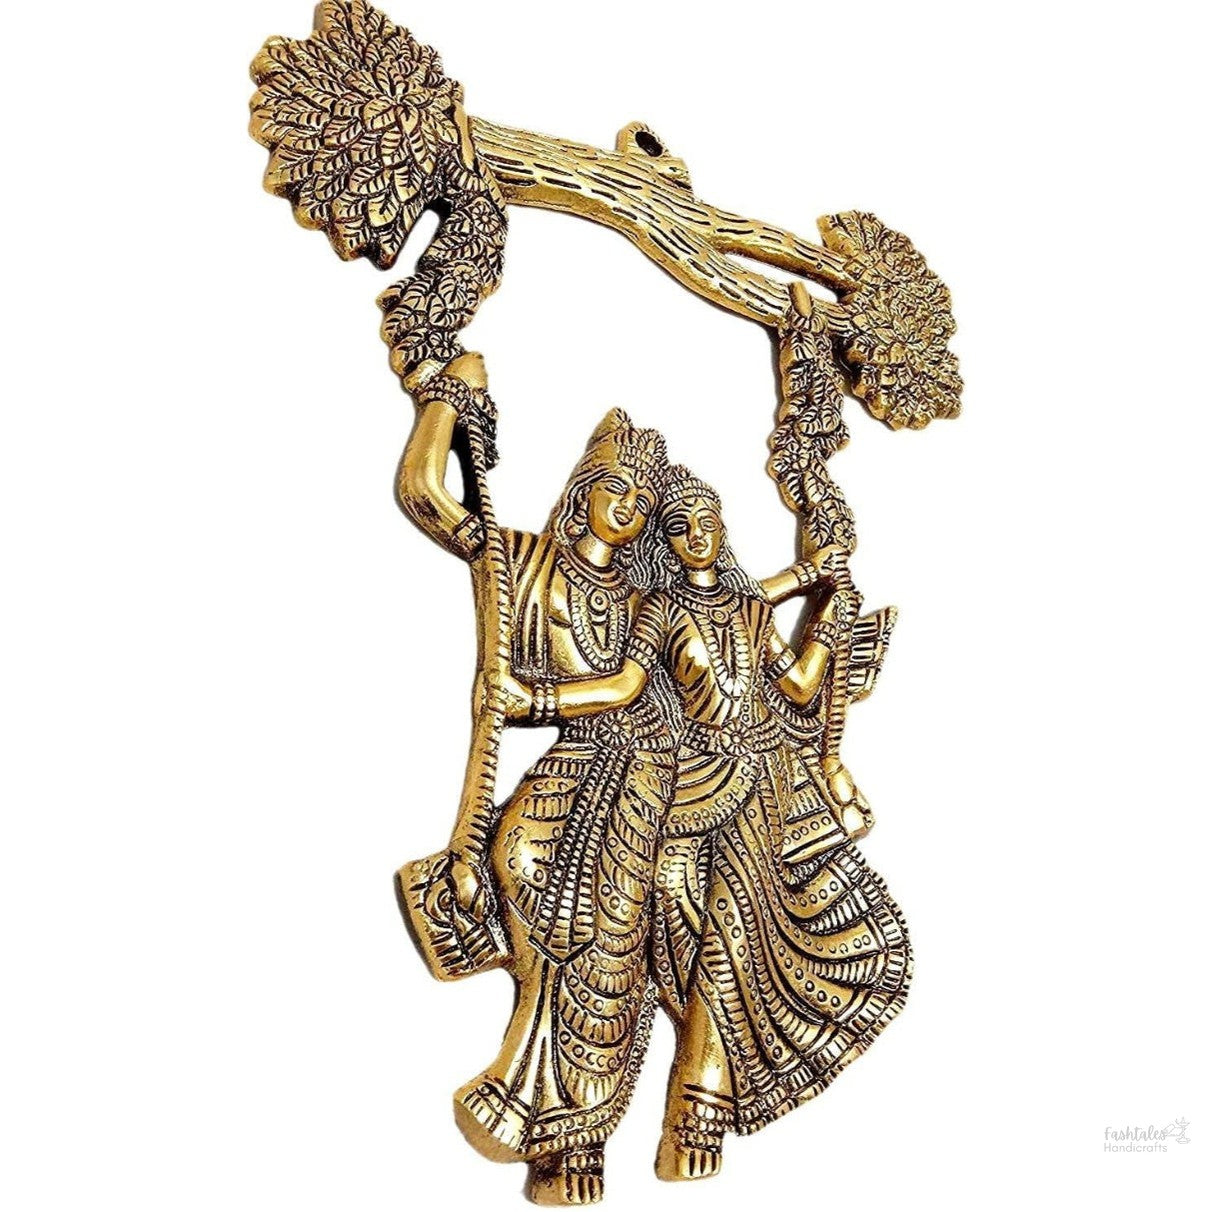 Fashtales Handicrafts Radha Krishana Murti on Swing Jhula Metal Statue Gold Antique Finish So Looks Very Beautiful for Decor Your Home,Office Walls,Showpiece Figurines,Religious Idol Gift Article...